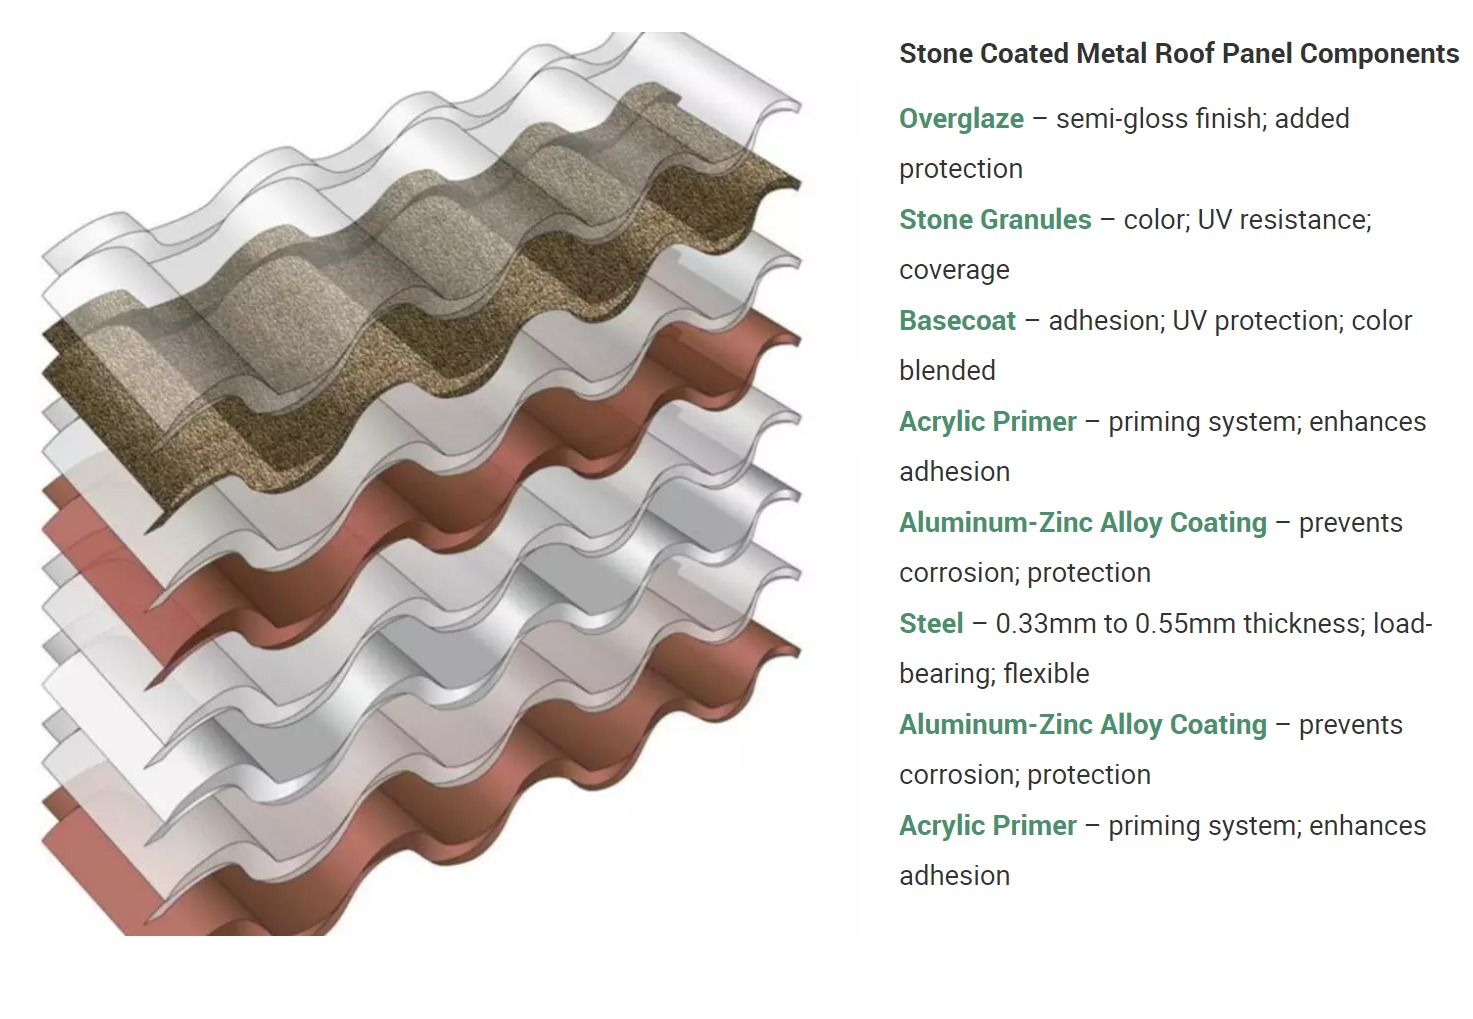 The Advantages of Stone Coated Metal Roofing Tiles